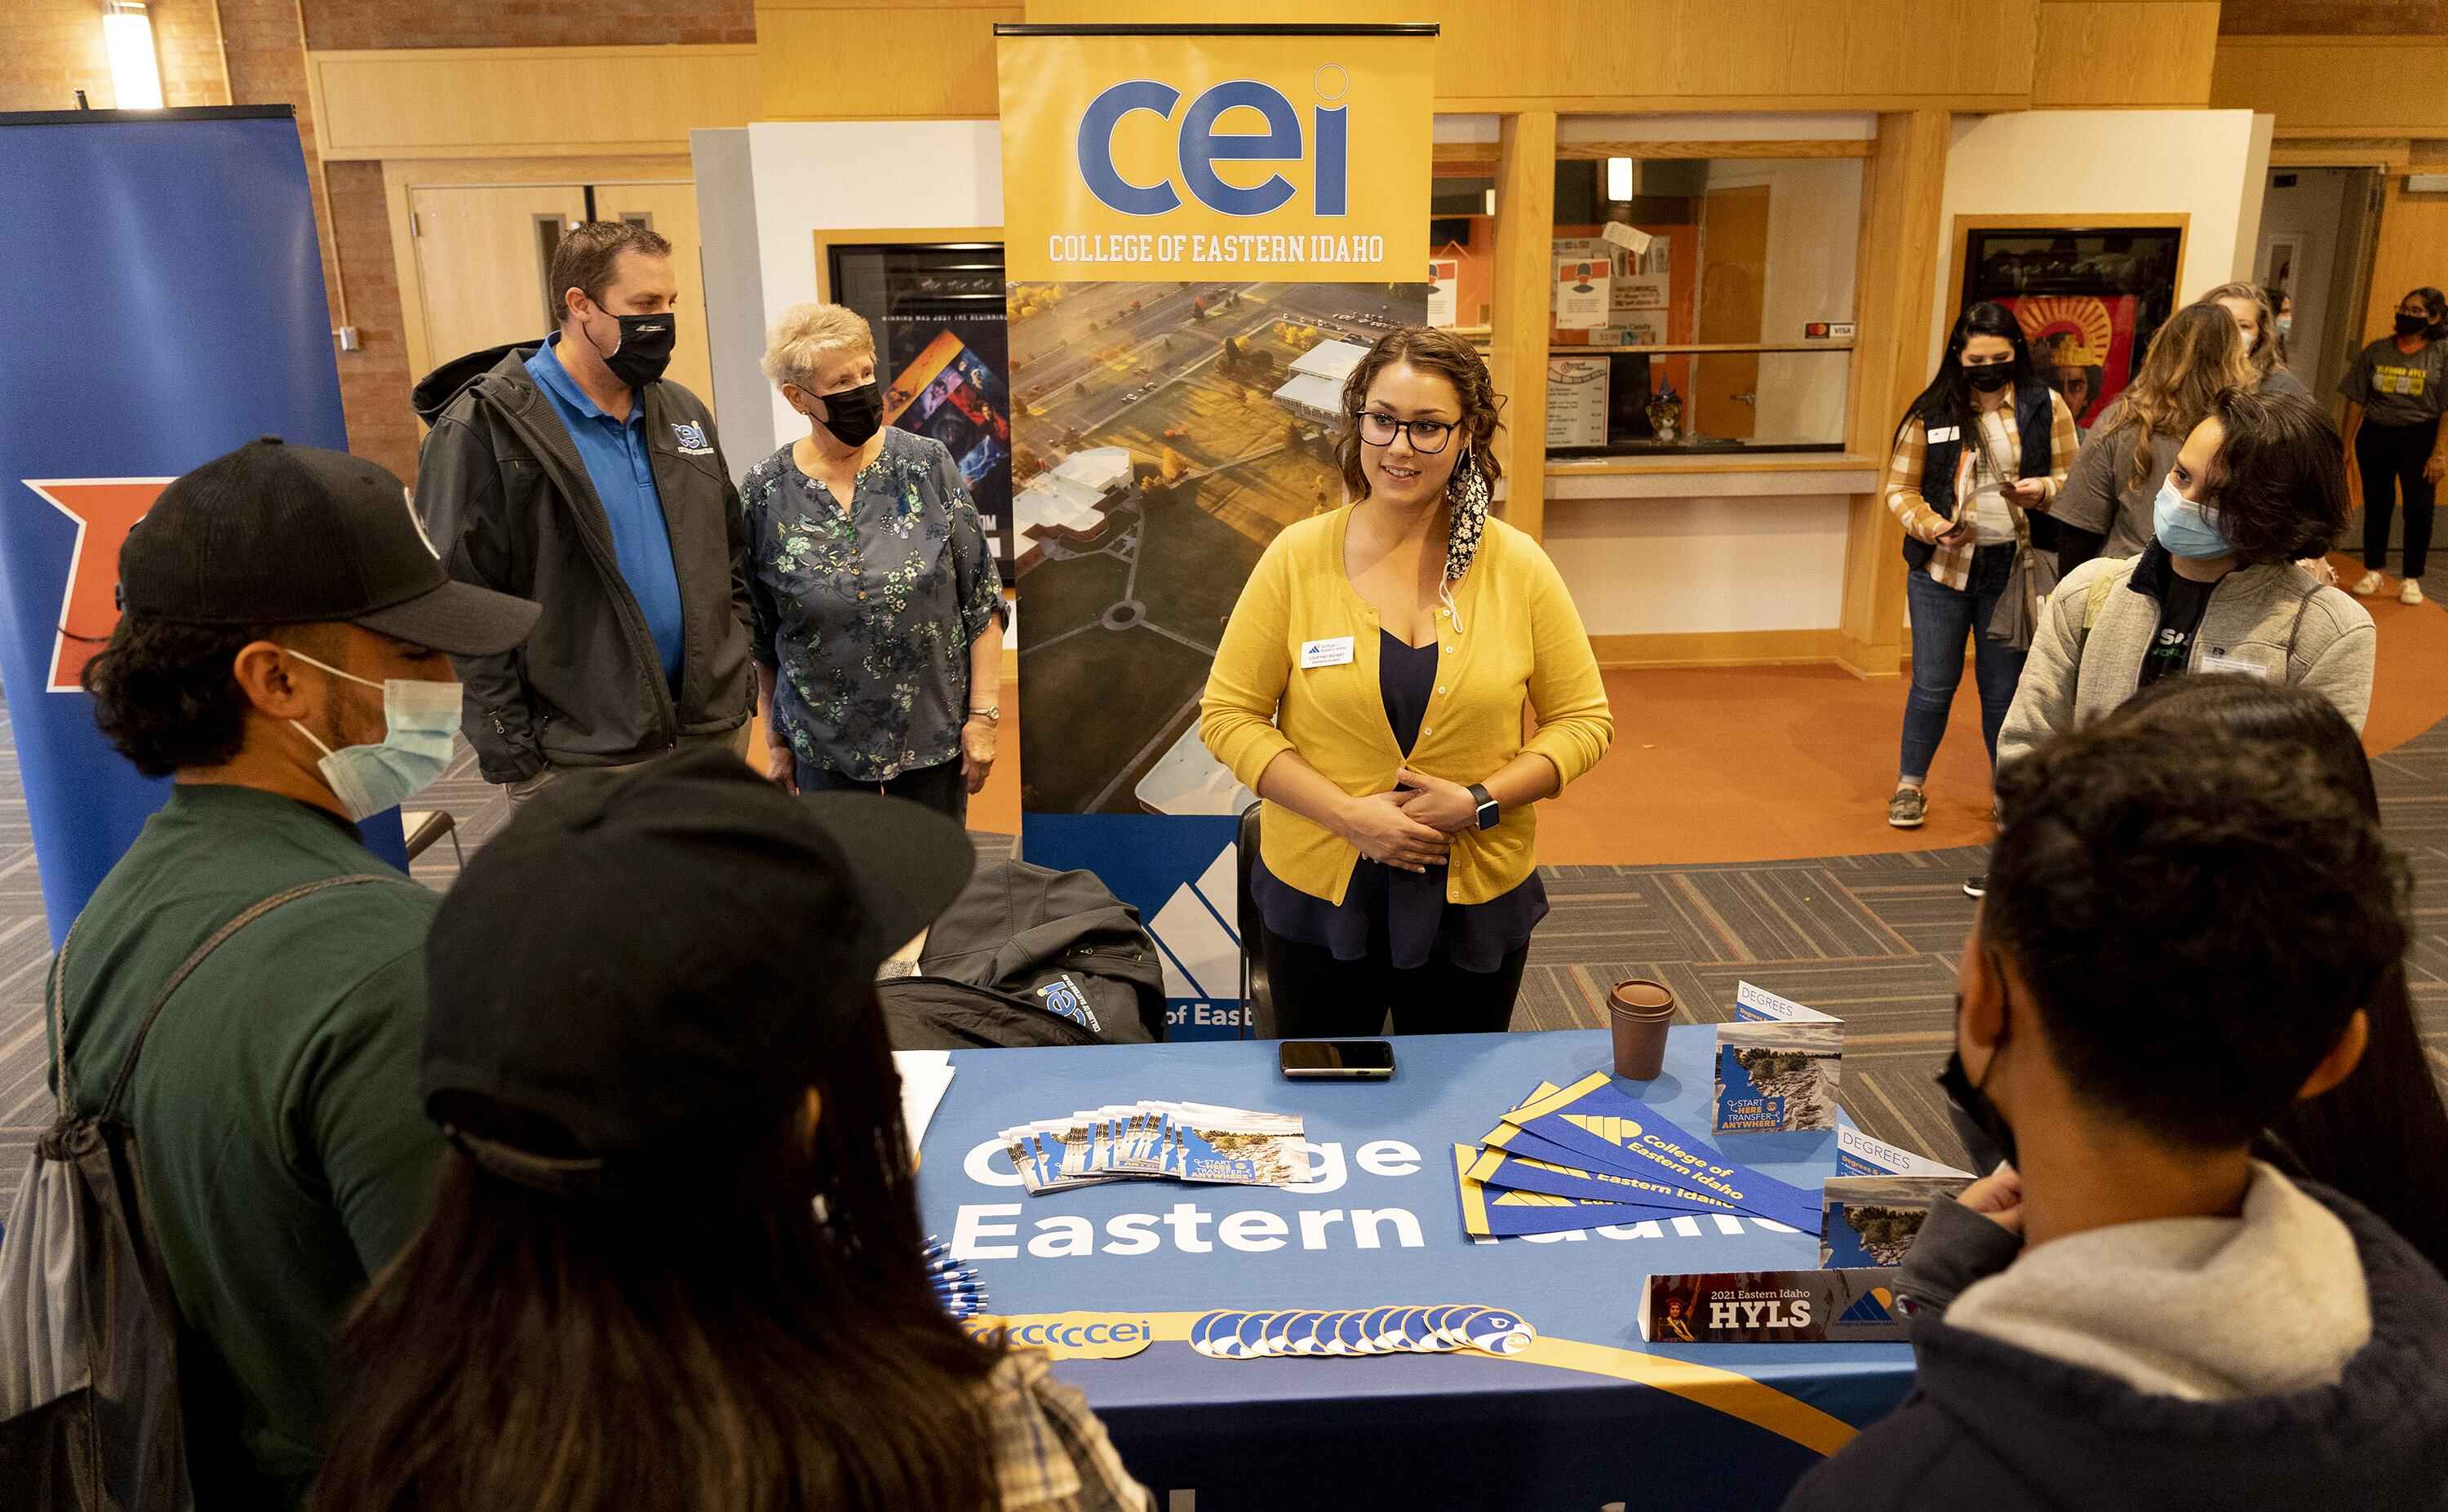 Students surrounding a CEI booth